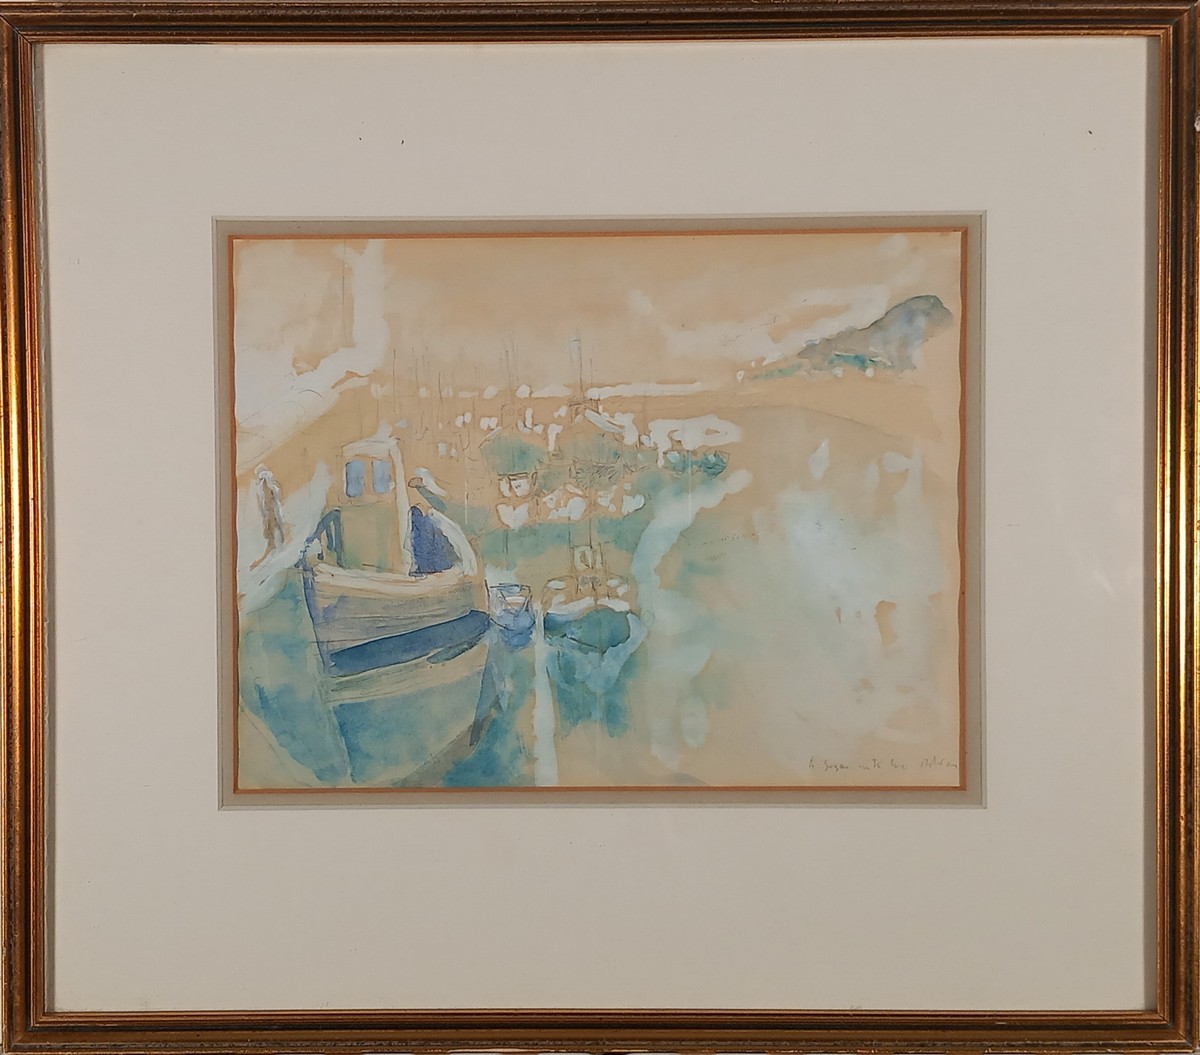 Adrian RYAN (British 1920-1998) Newlyn Harbour, Watercolour, inscribed to Sue and signed lower - Image 2 of 3